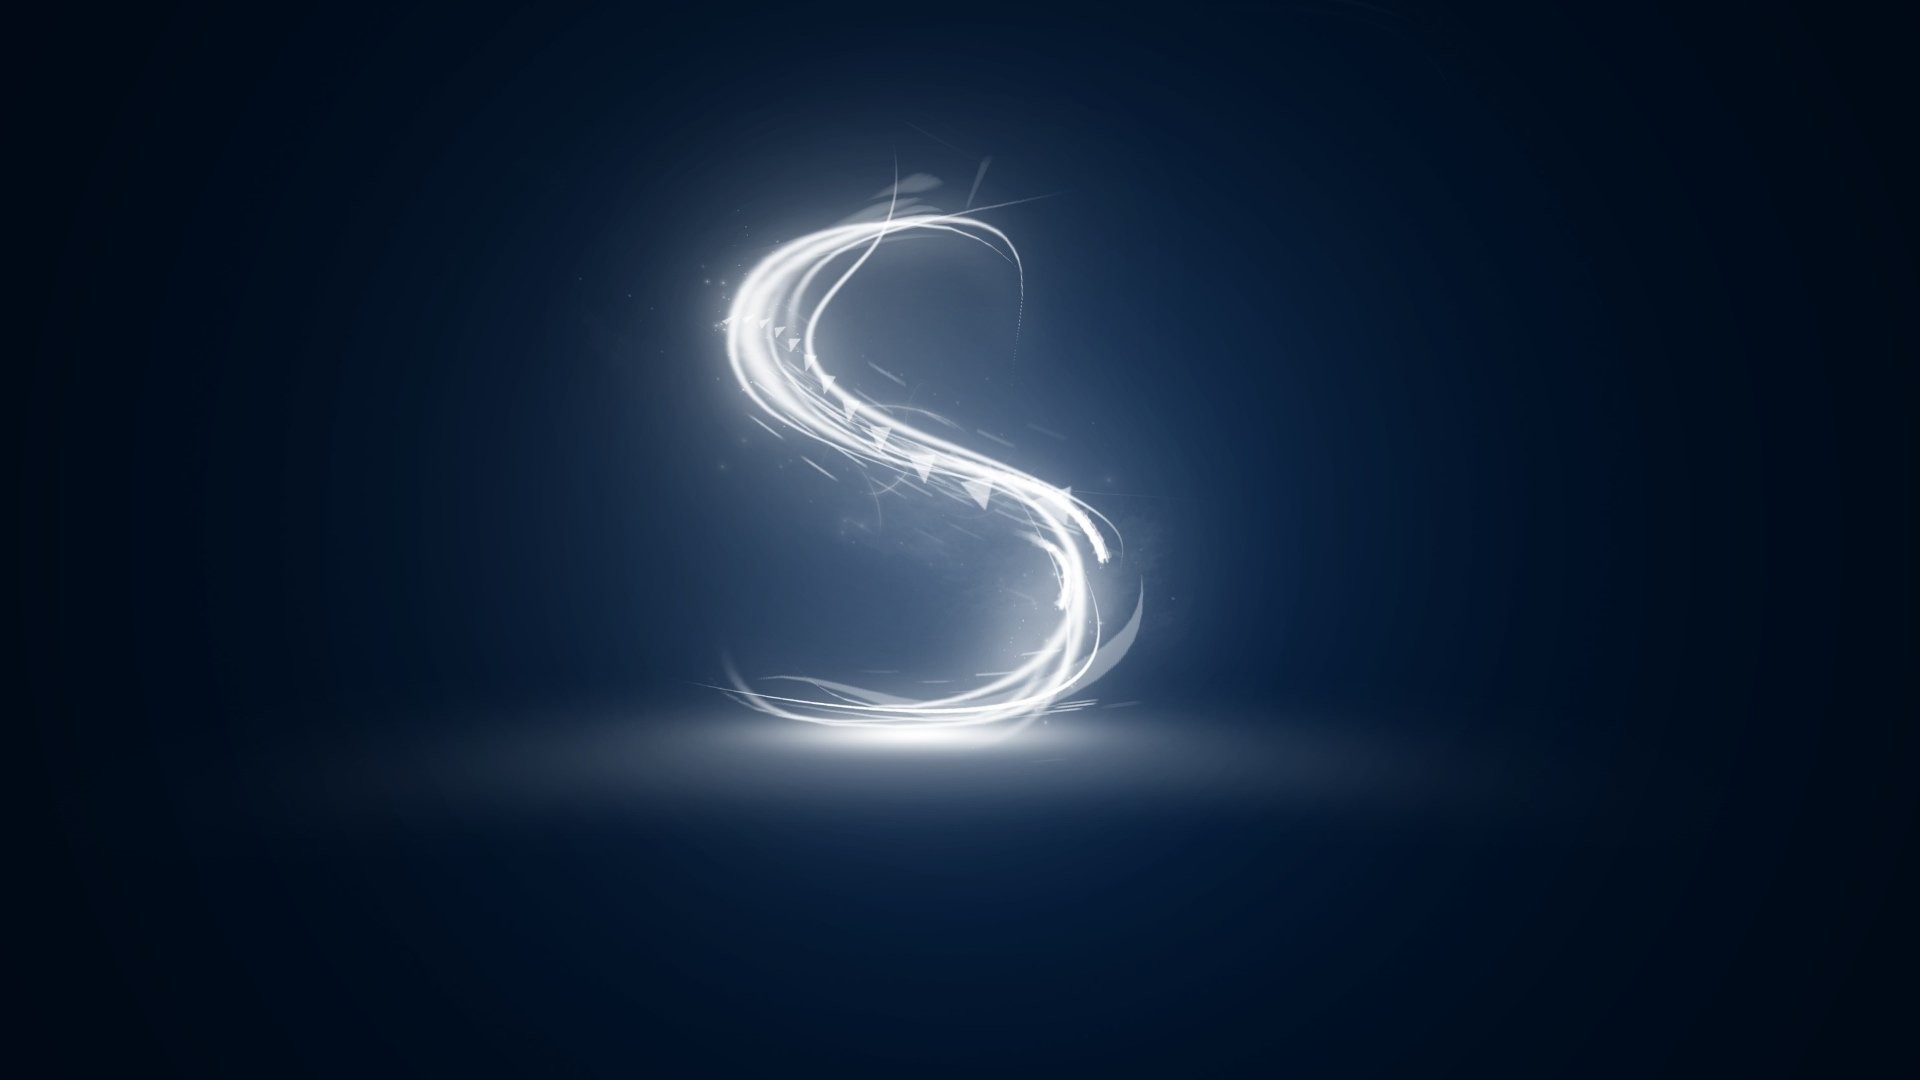 Letter S Wallpapers For Mobile HD Wallpapers Download Free Map Images Wallpaper [wallpaper376.blogspot.com]